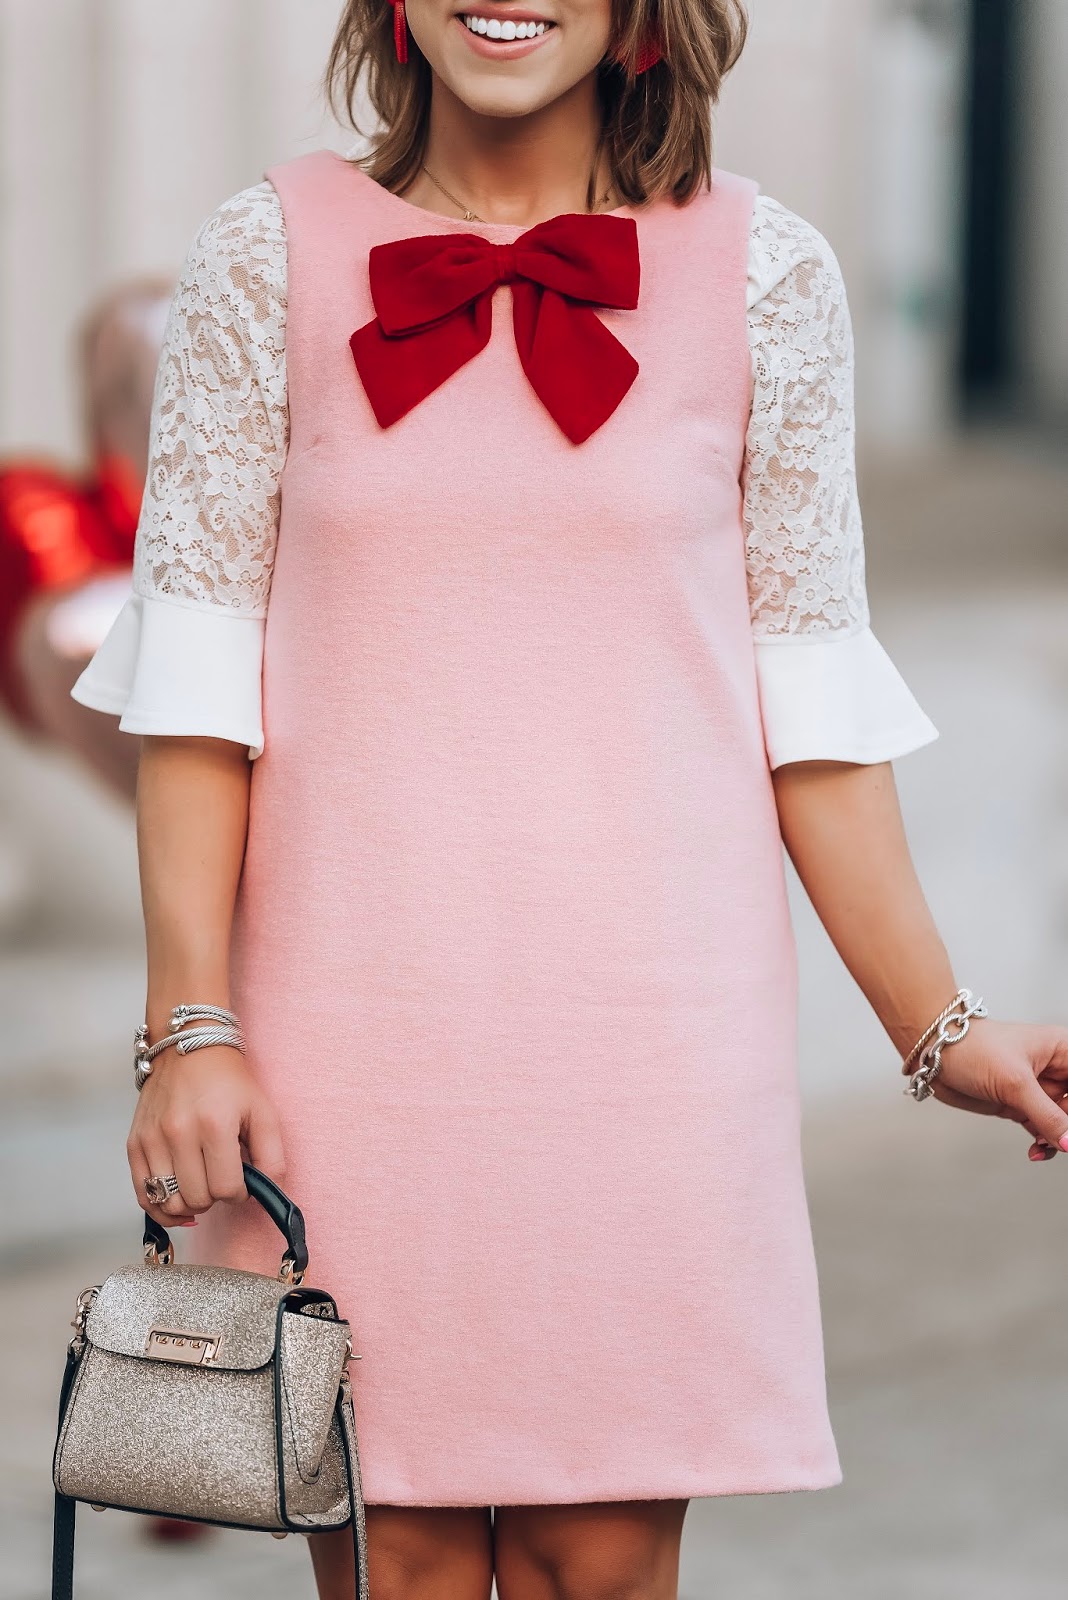 The Perfect Dress For Valentine's Day - Pink & Red Bow Dress - Something Delightful Blog #valentinesday #valentinesdaystyle #kjp #pinkdress #bow #valentine #galentinesday #winterstyle #hearts